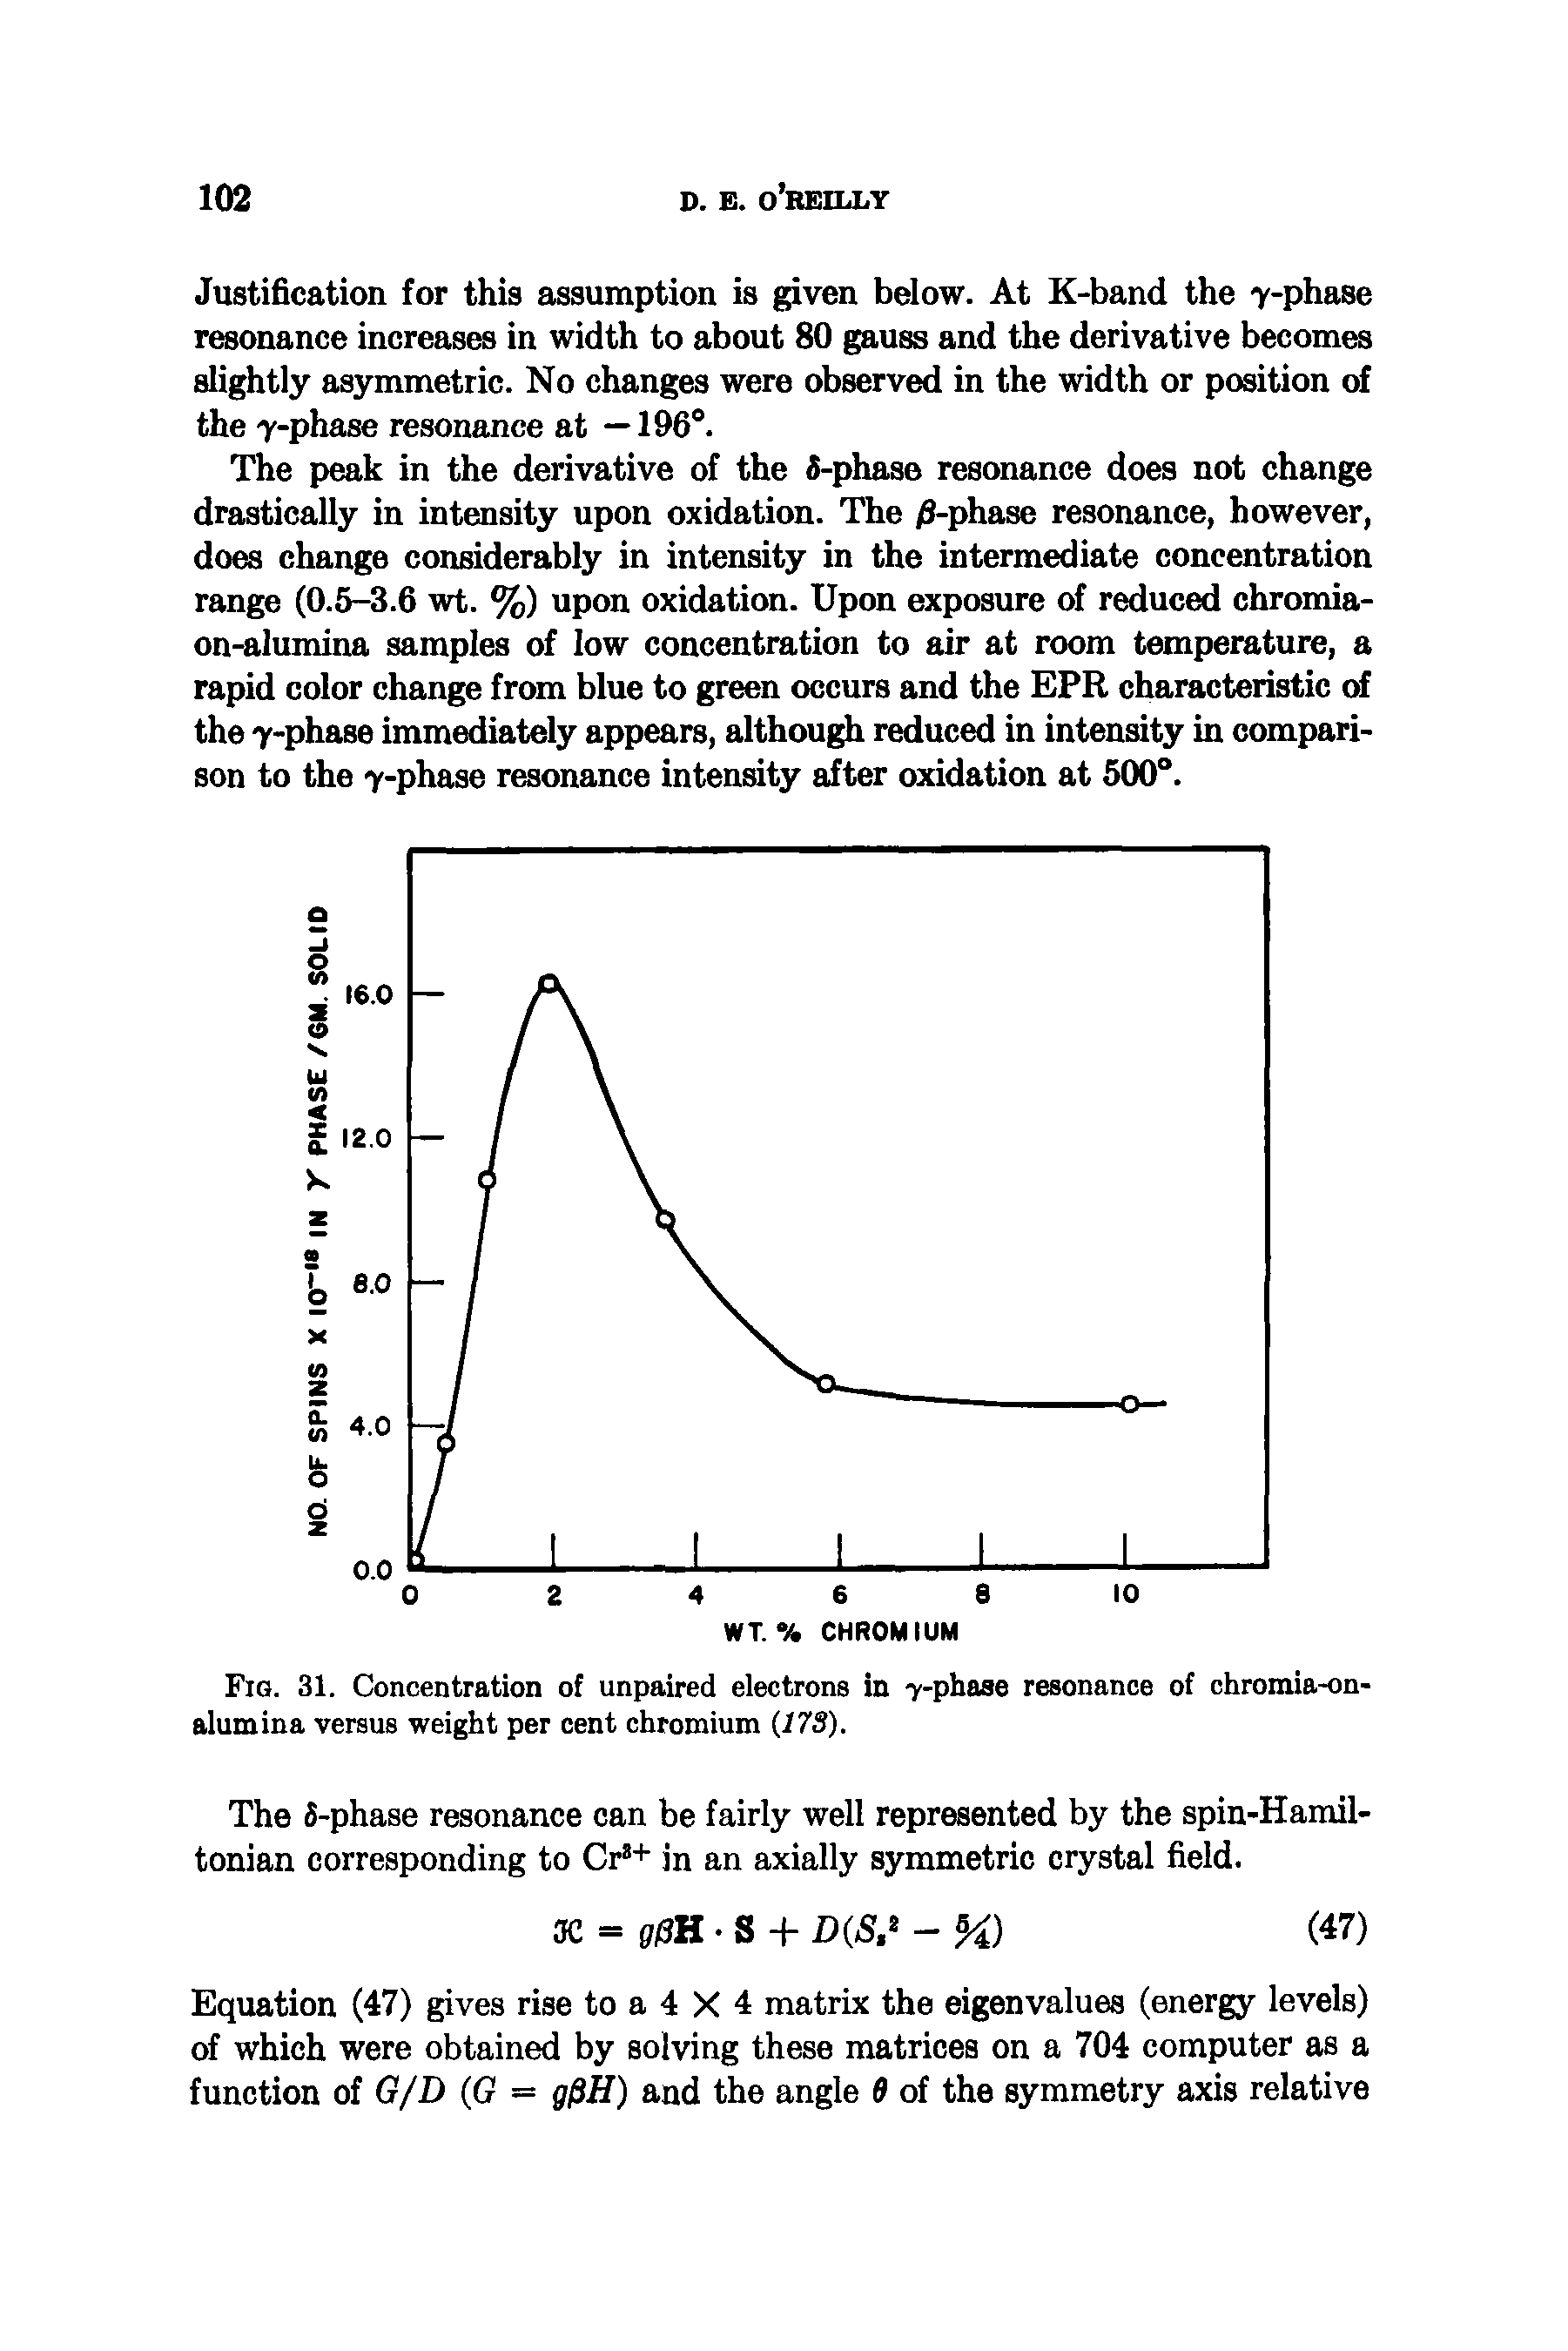 Fig. 31. Concentration of unpaired electrons in 7-phase resonance of chromia-on-alumina versus weight per cent chromium (17S).